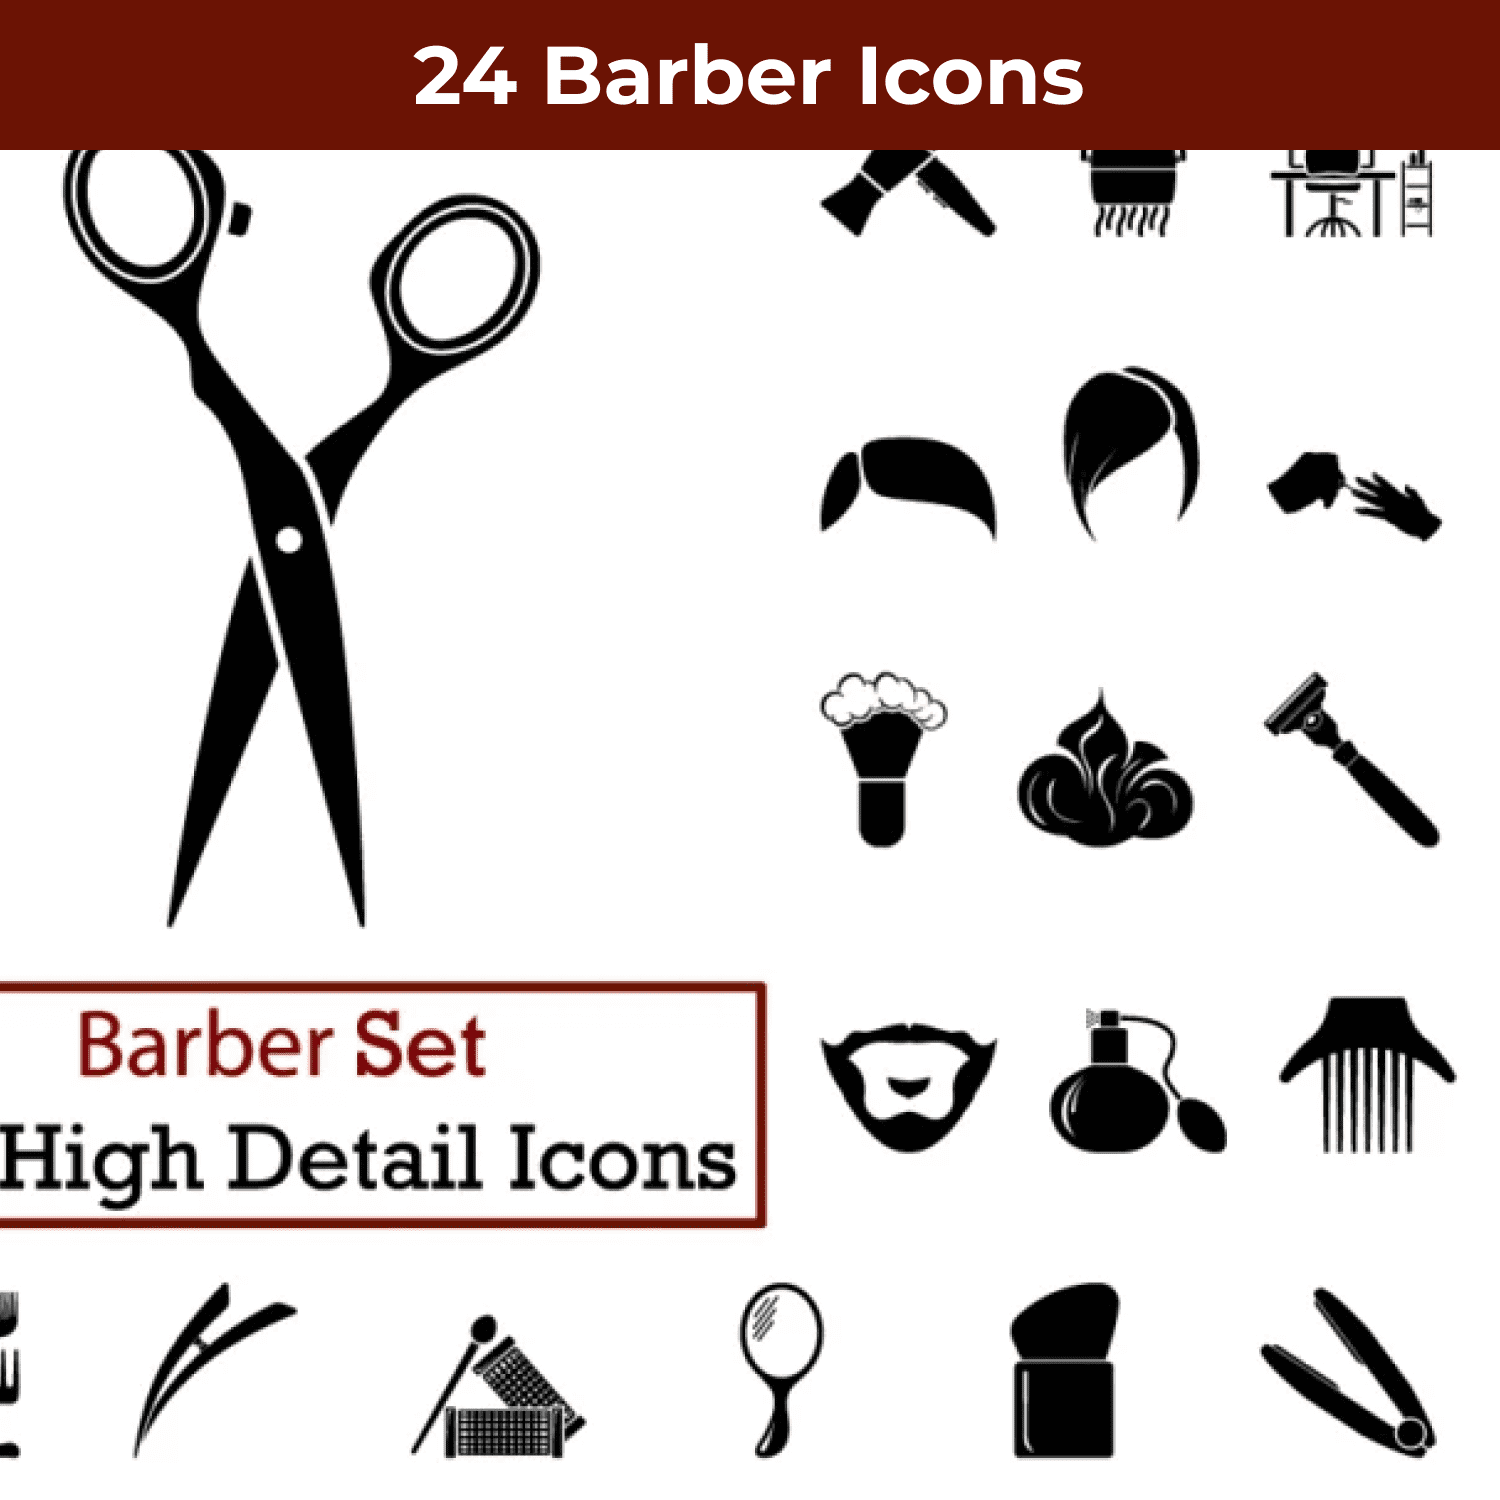 24 Barber Icons cover image.